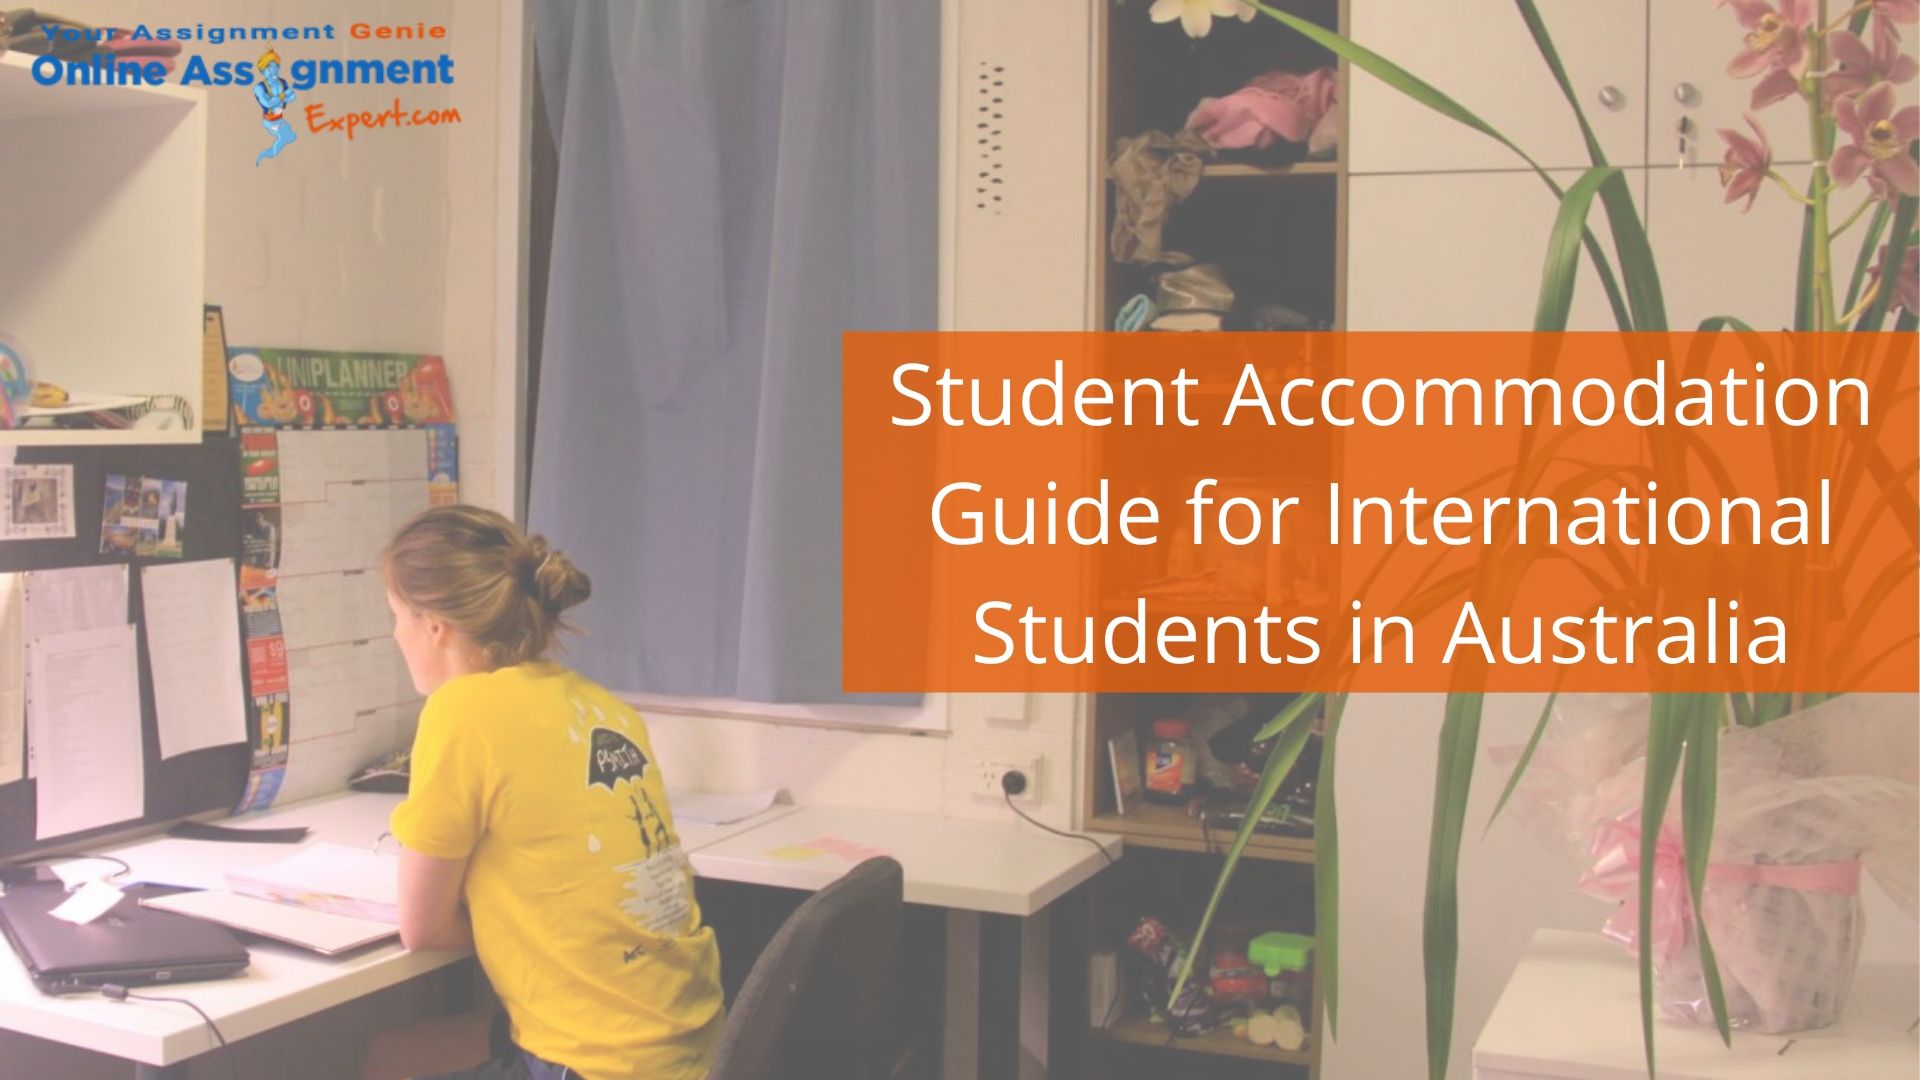 Student Accommodation Guide for International Students in Australia